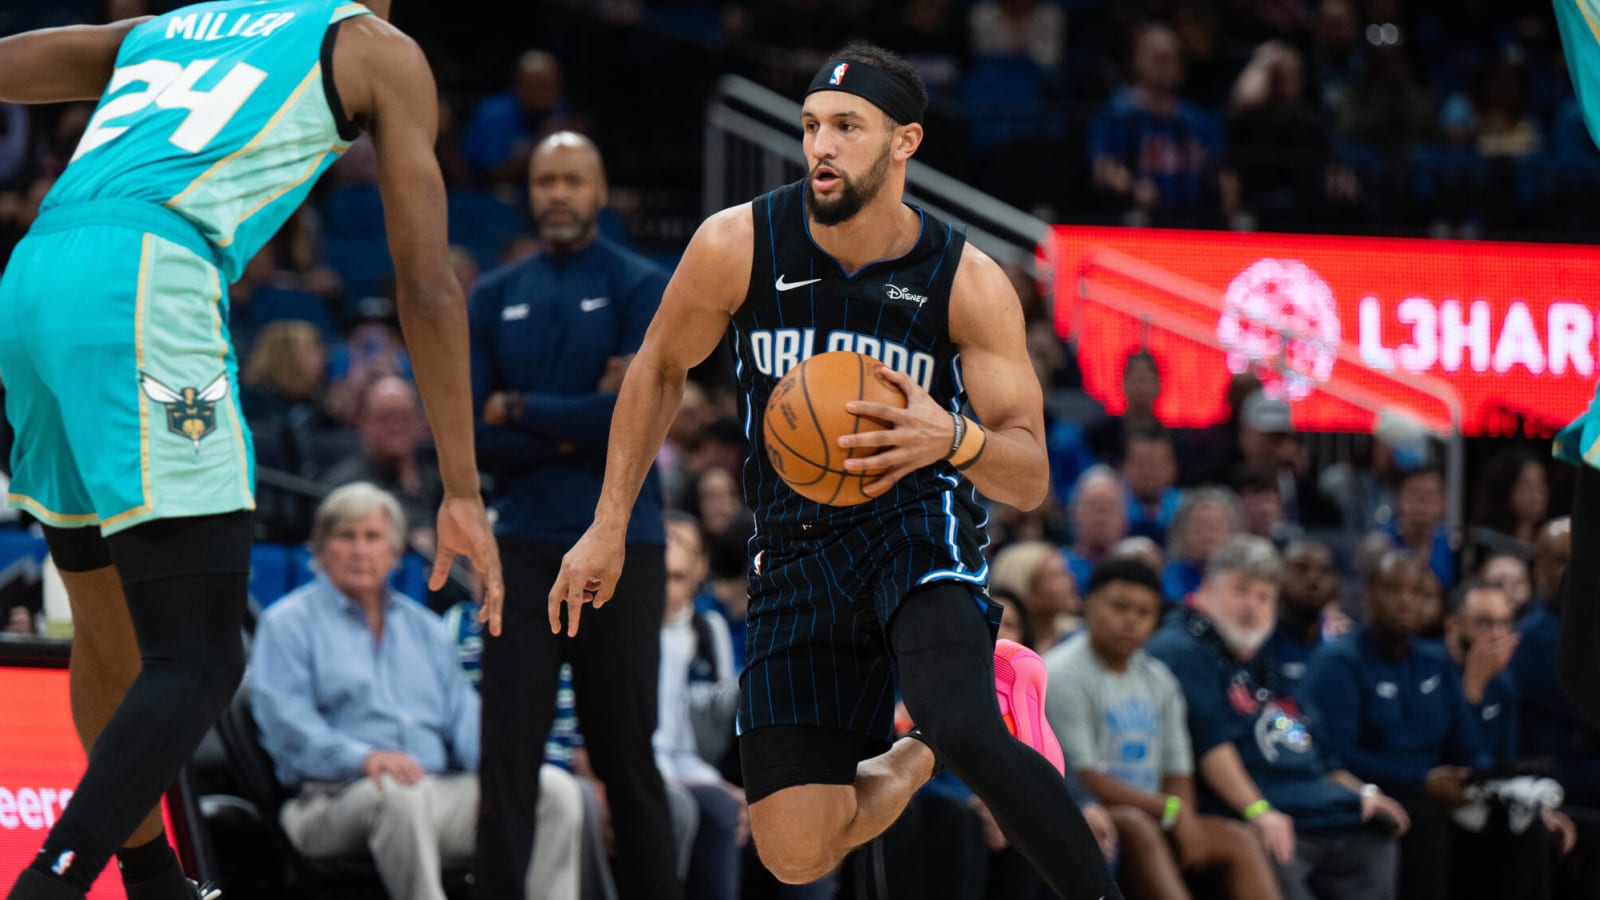 Magic Secure Play-In Berth with Dominant 112-92 Win Over Hornets